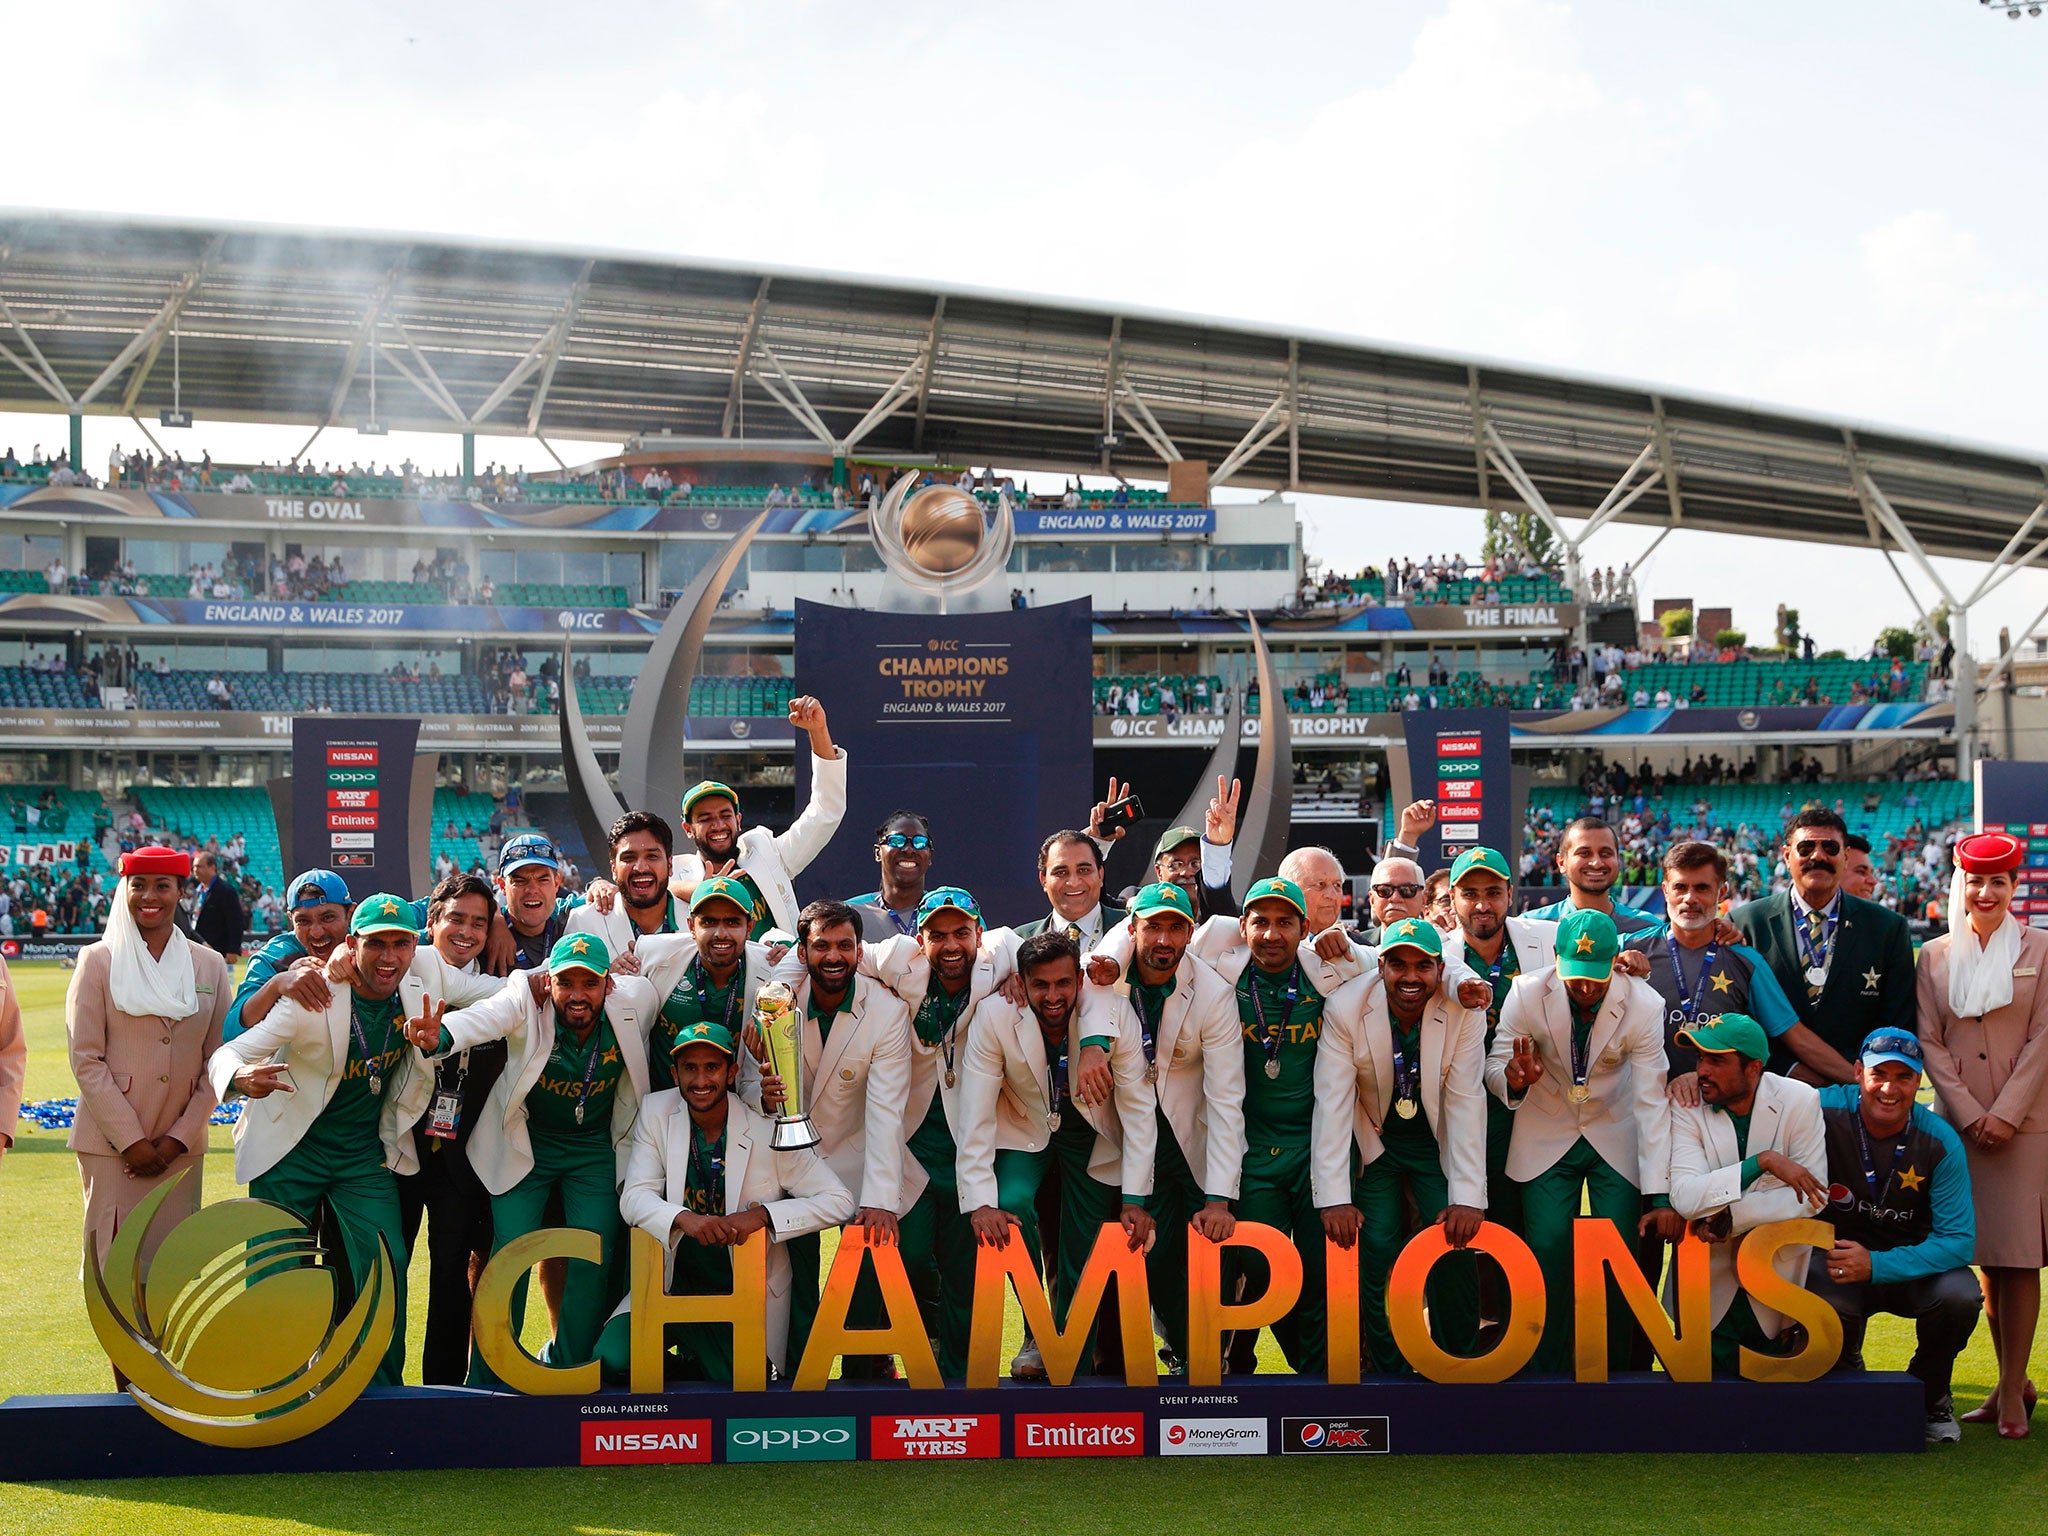 Pakistan were crowned champions at The Oval